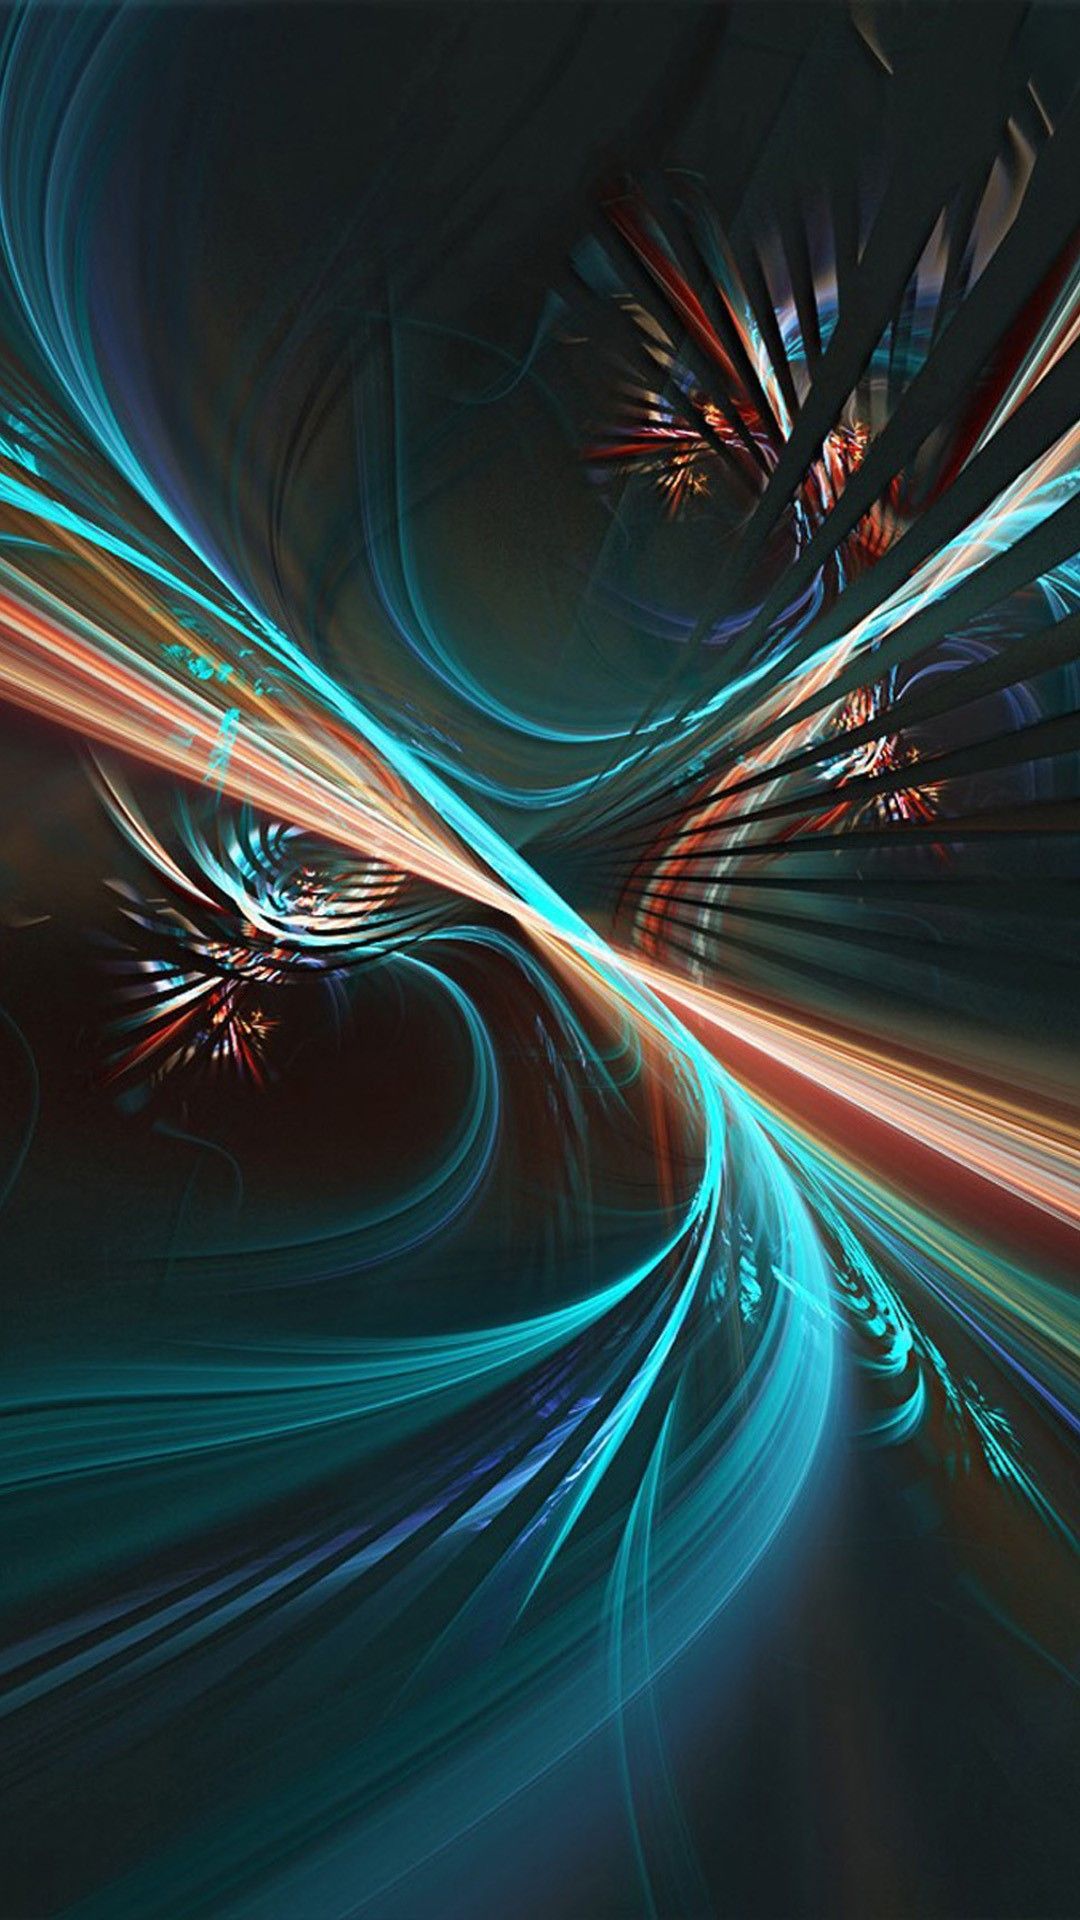 Abstract Smartphone Wallpaper Free Abstract Smartphone